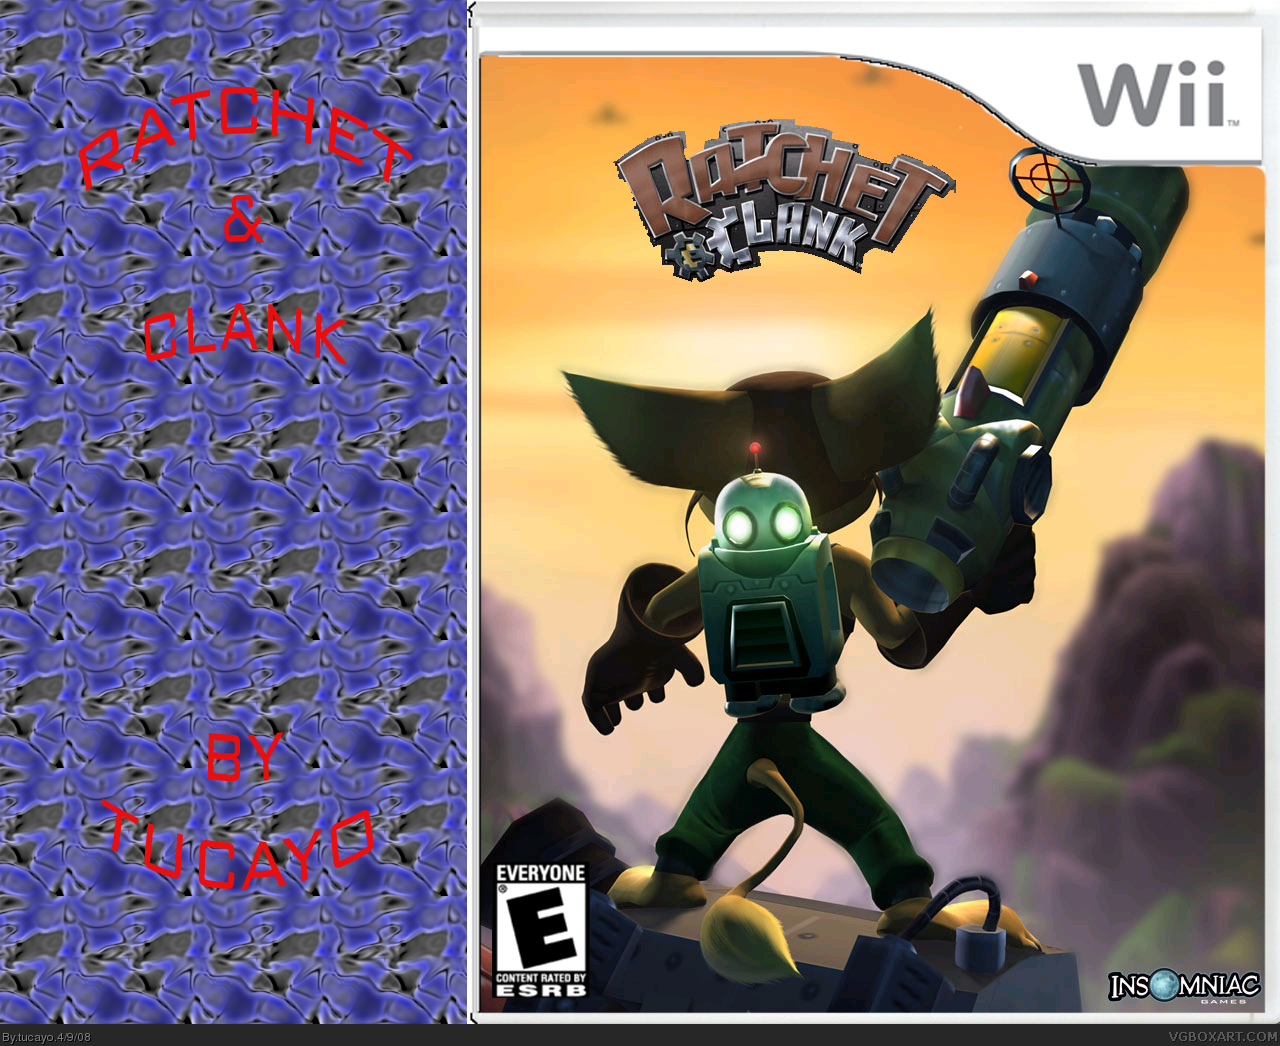 Ratchet and Clank Wii box cover